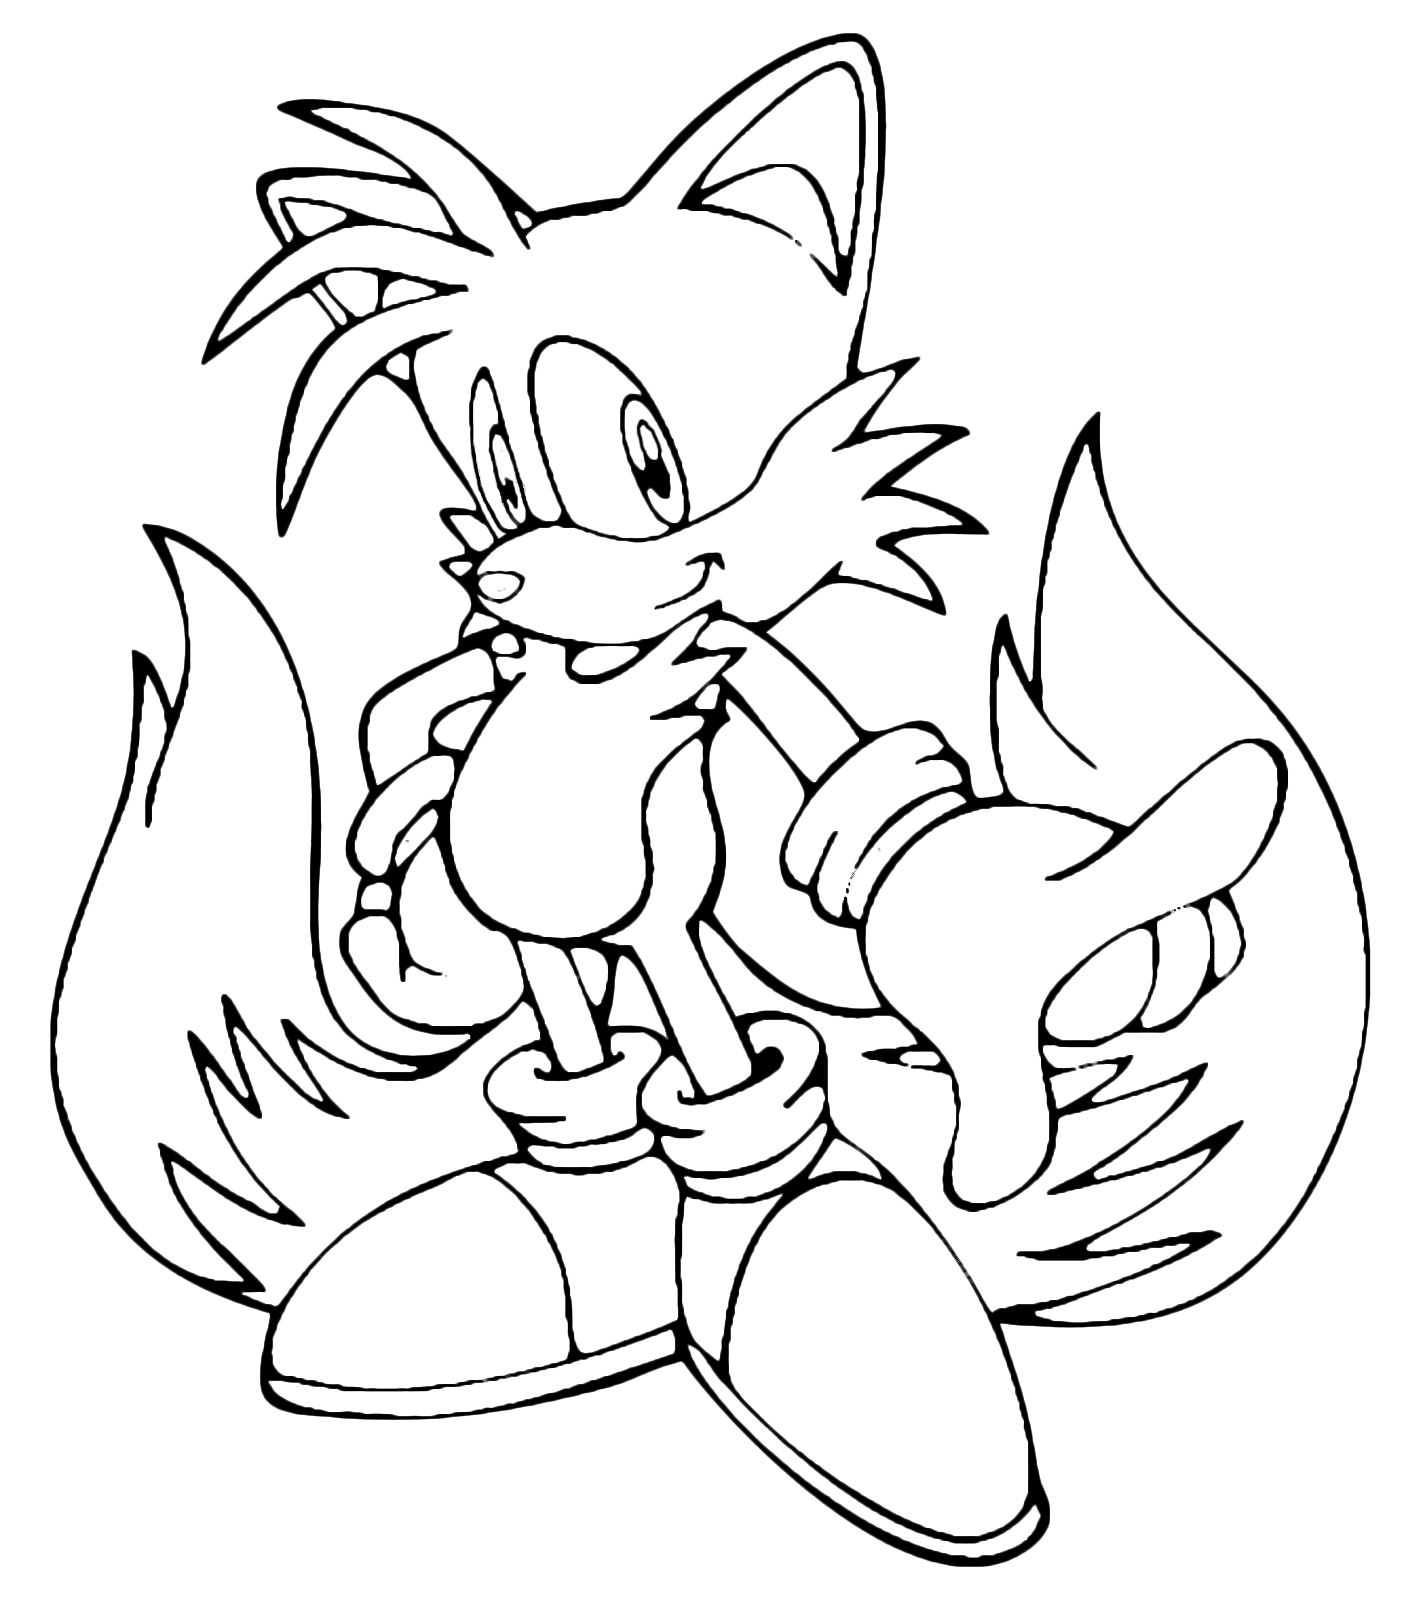 Simple Sonic coloring page for kids